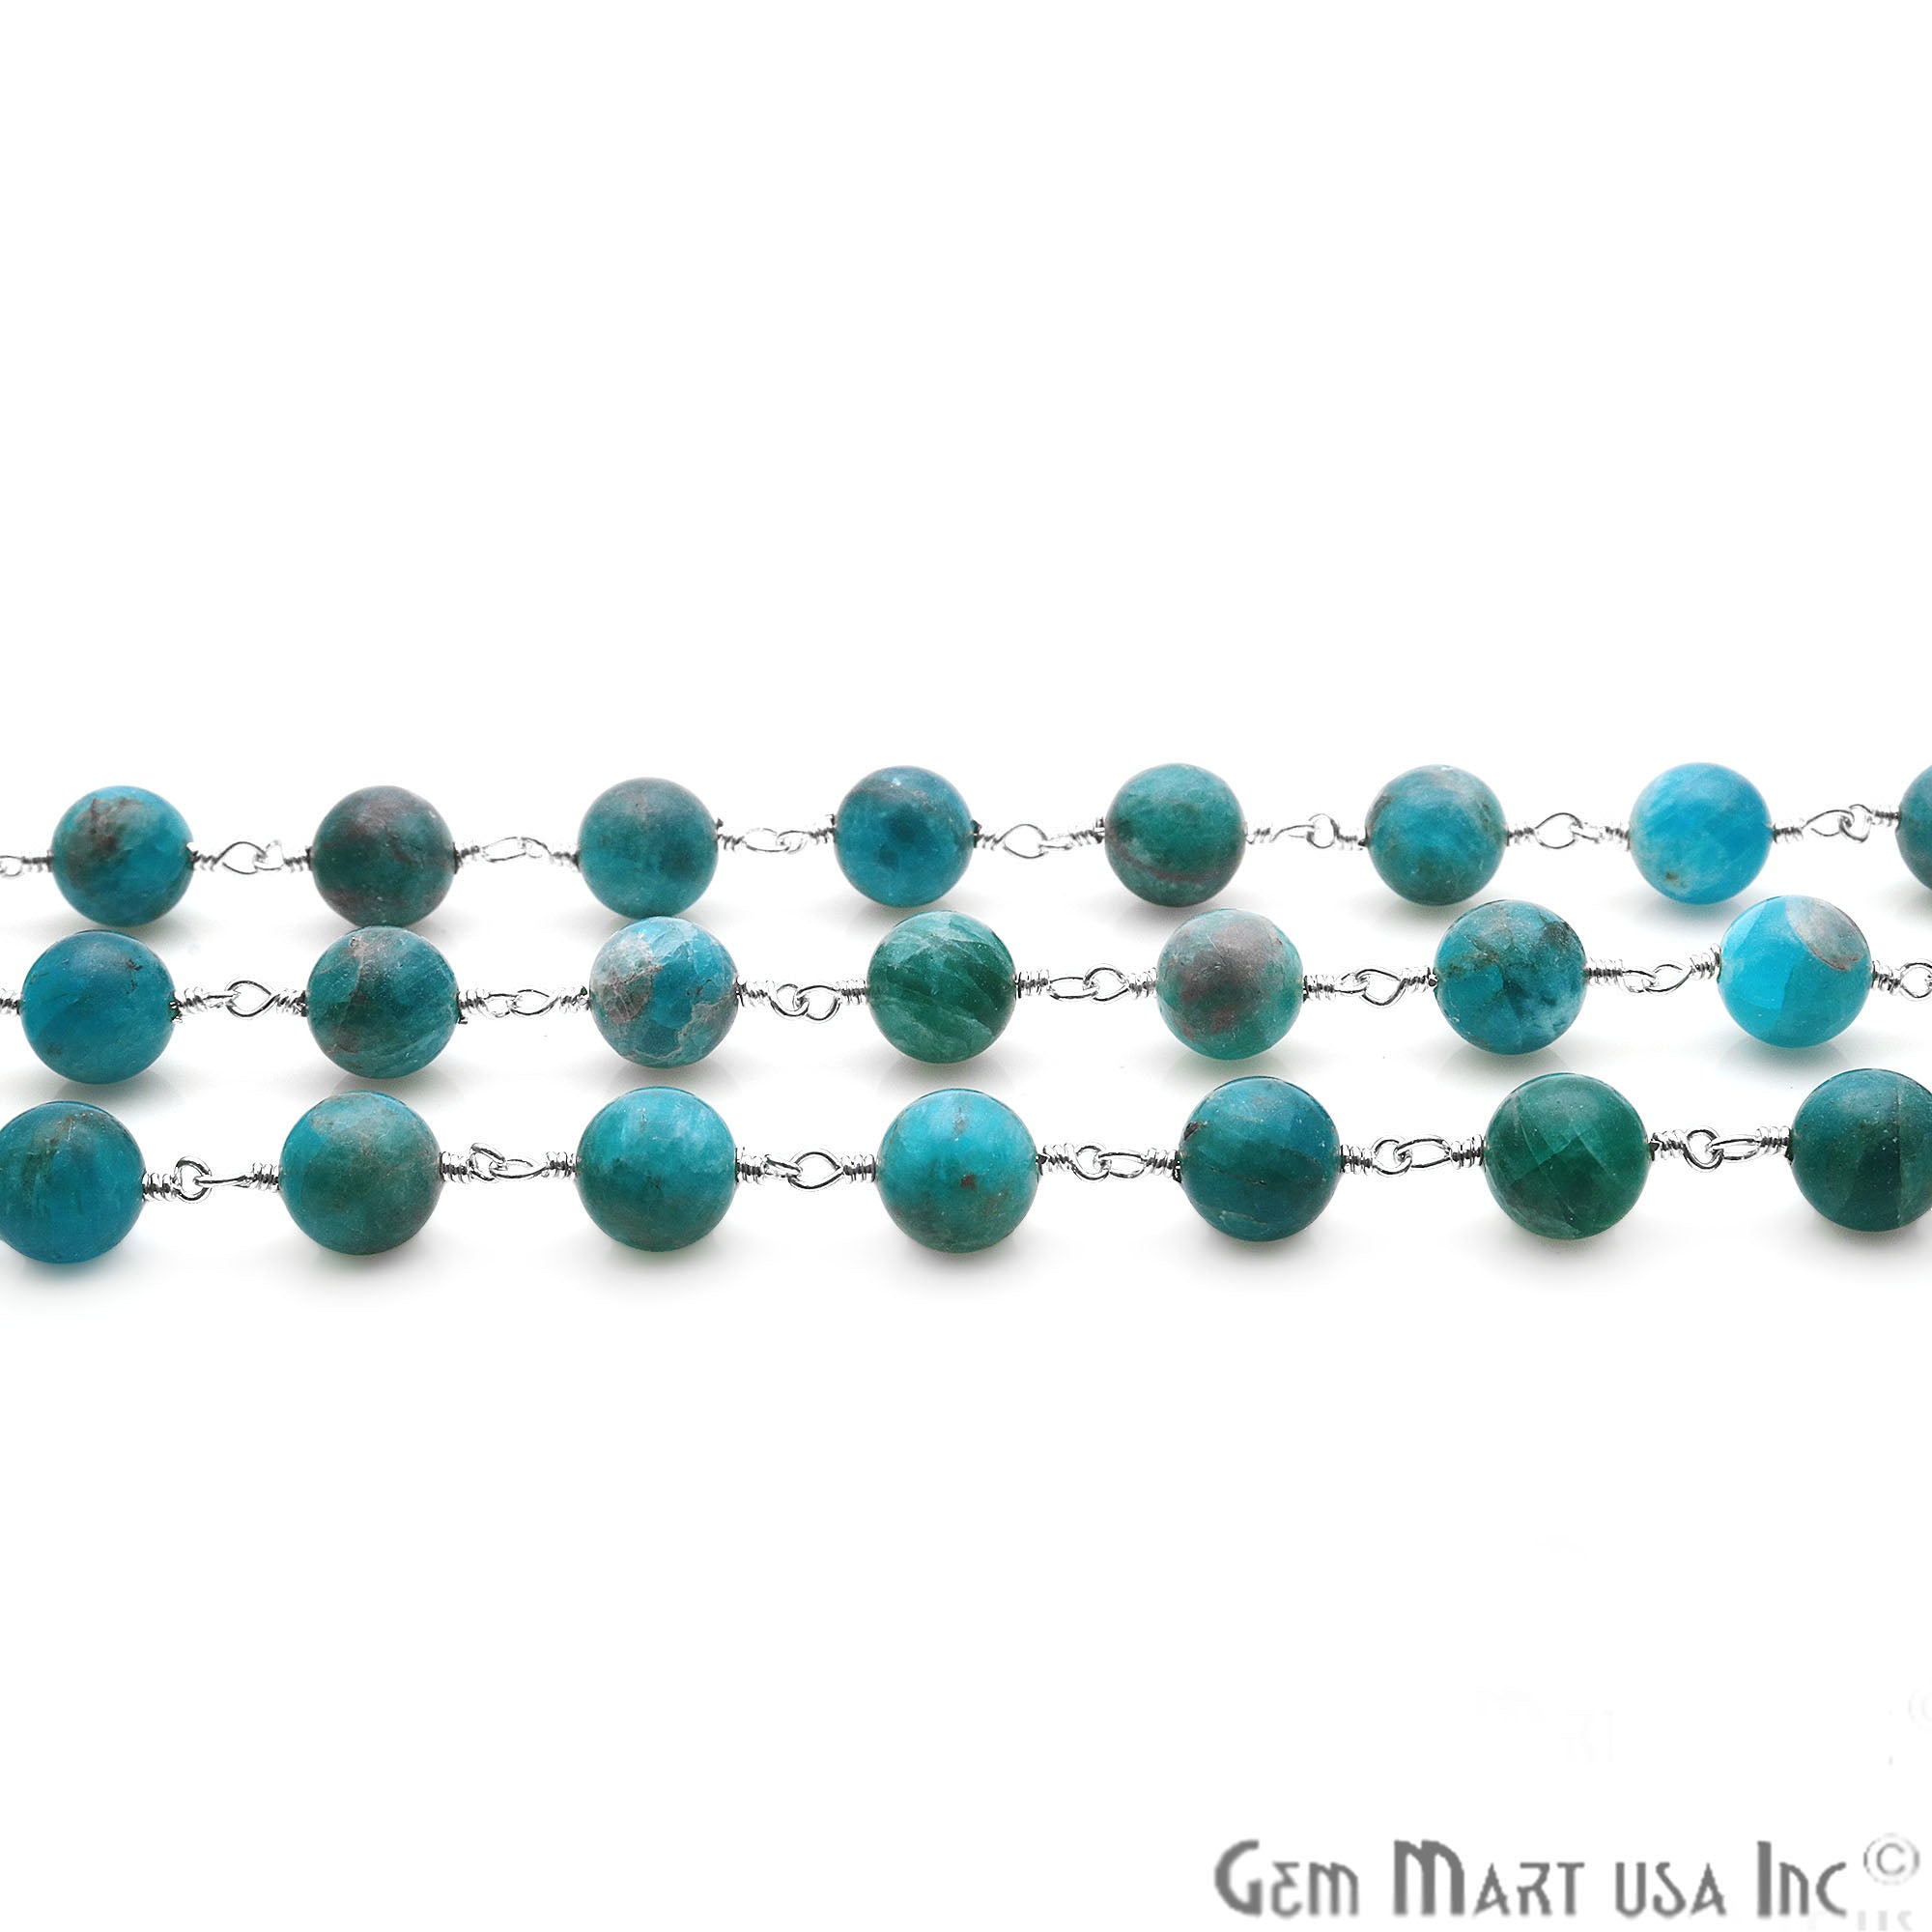 Neon Apatite Smooth Beads 8mm Silver Plated Wire Wrapped Gemstone Rosary Chain - GemMartUSA